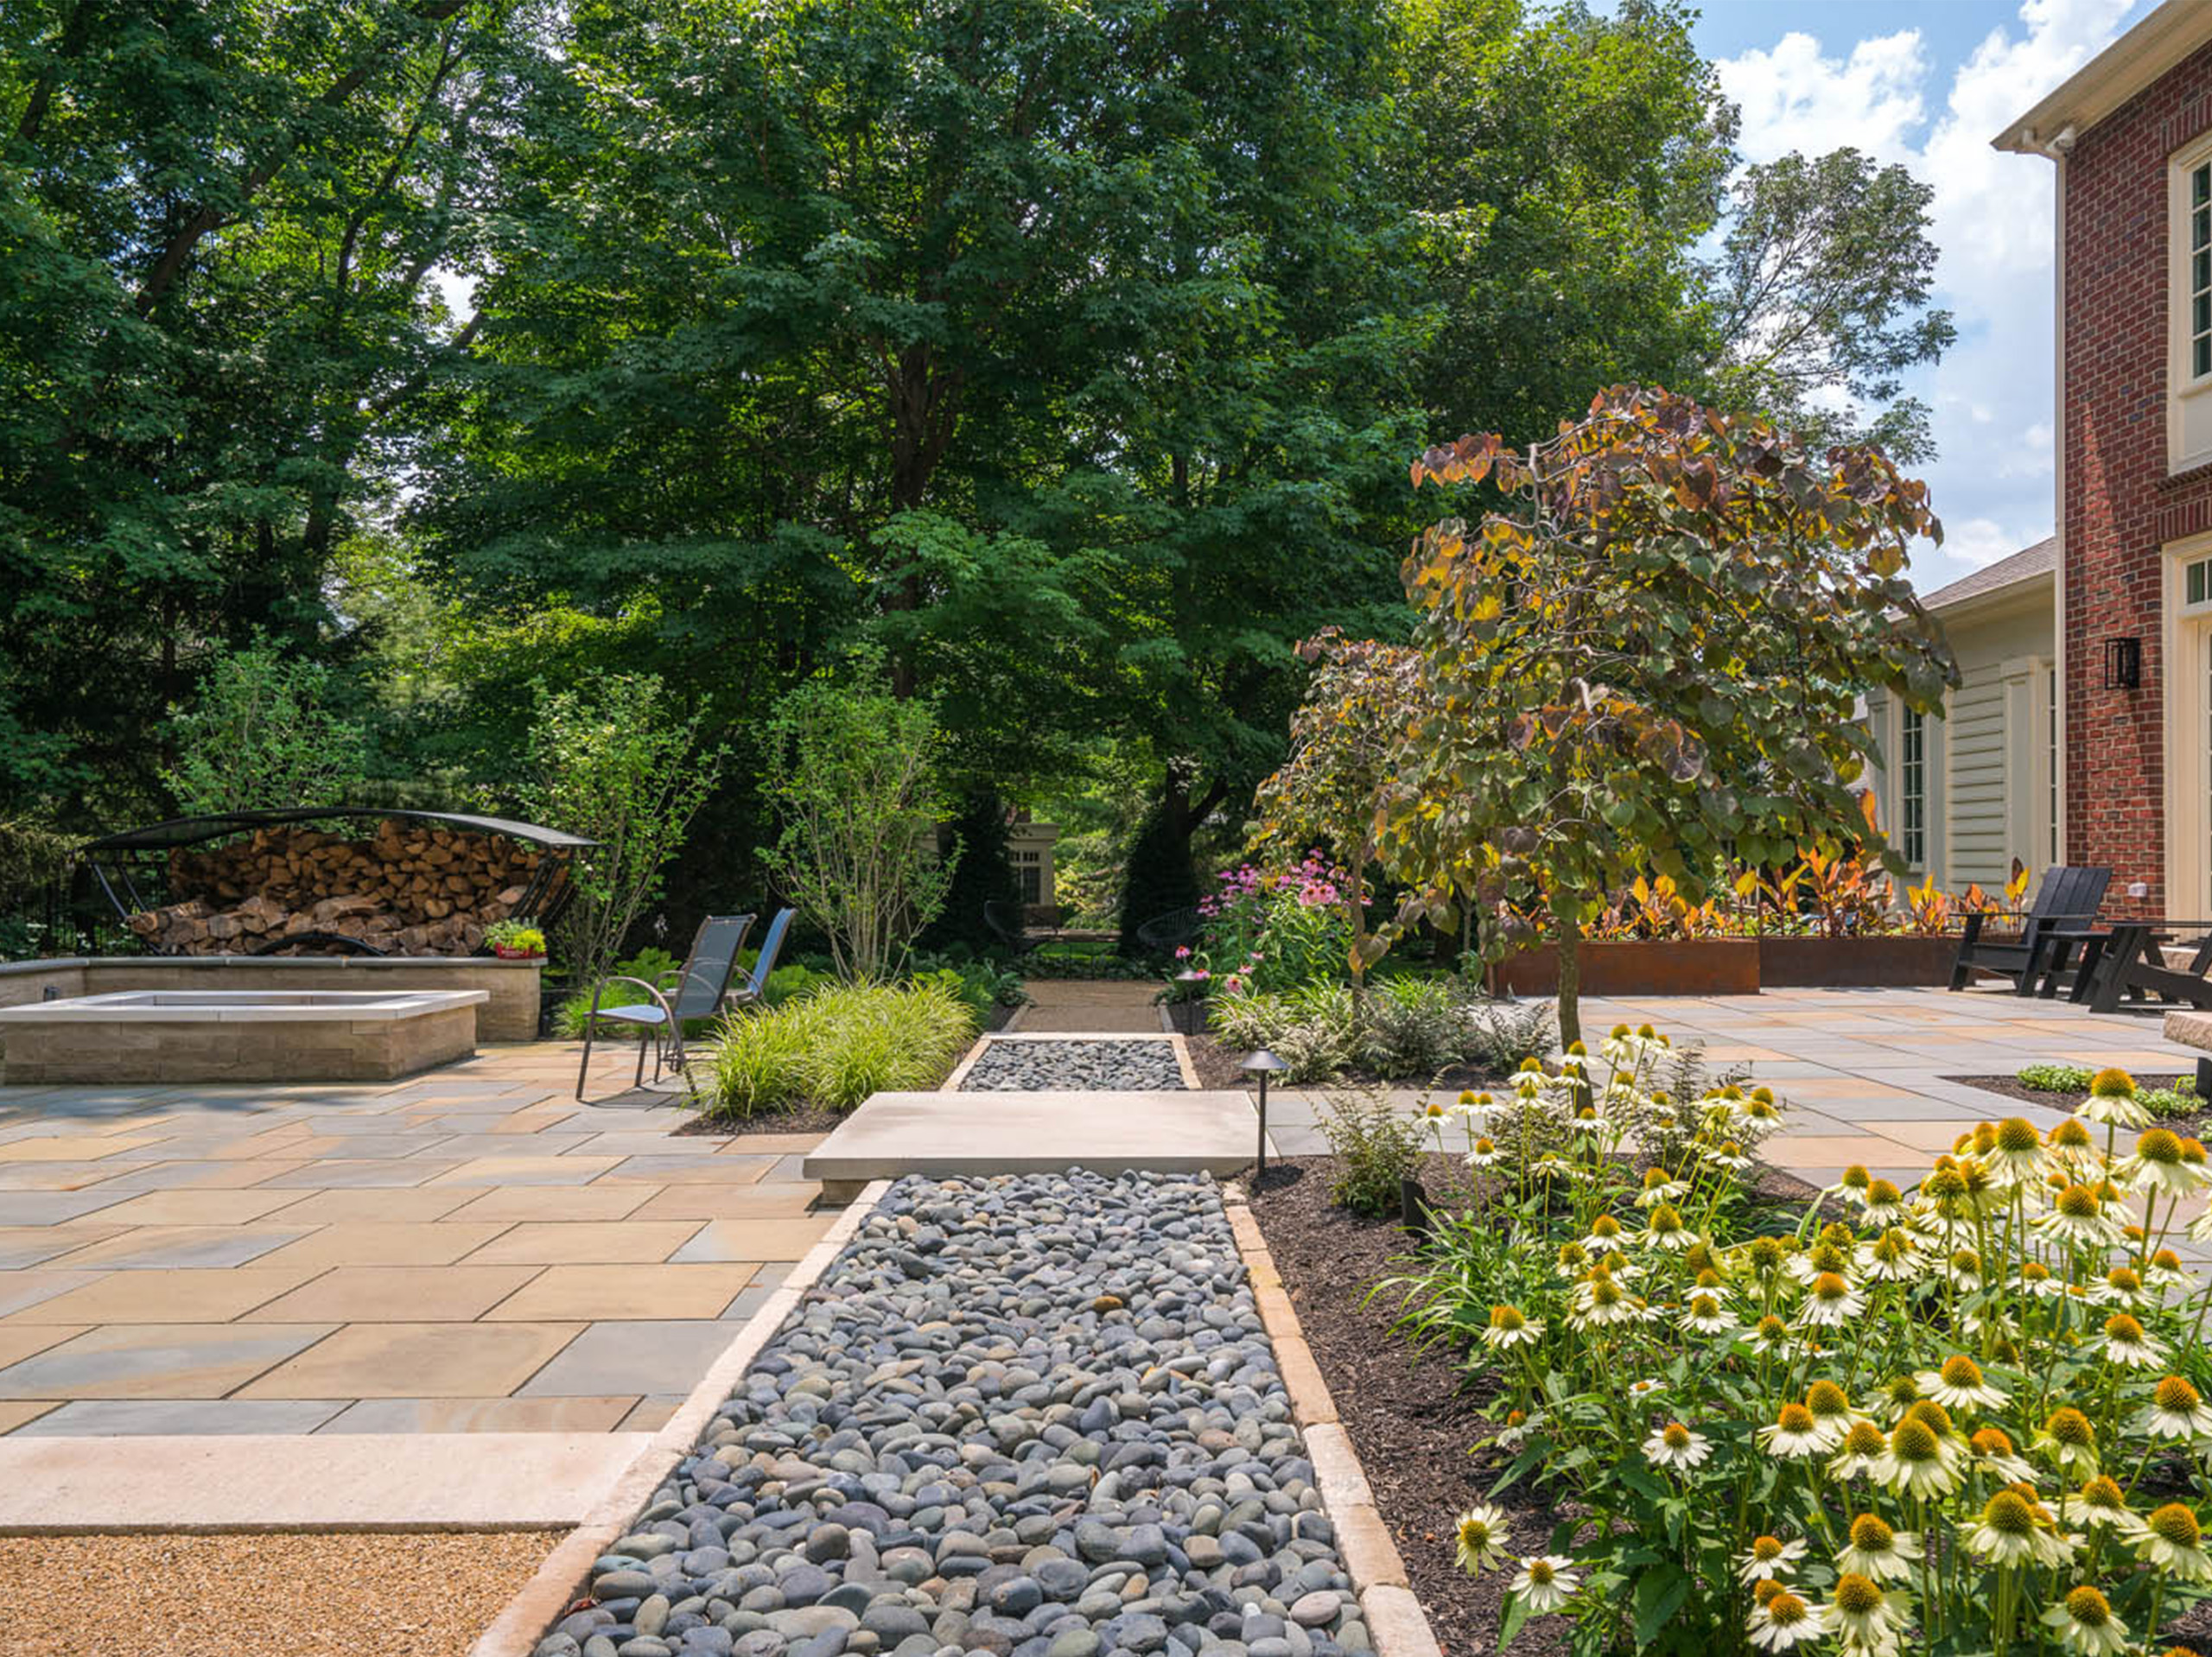 Top landscaping design services, landscaping design, landscaping design services, Custom Landscape Design, Planting Installation, Hardscape Construction, Water Features and Pools, Landscape Lighting, Irrigation Systems